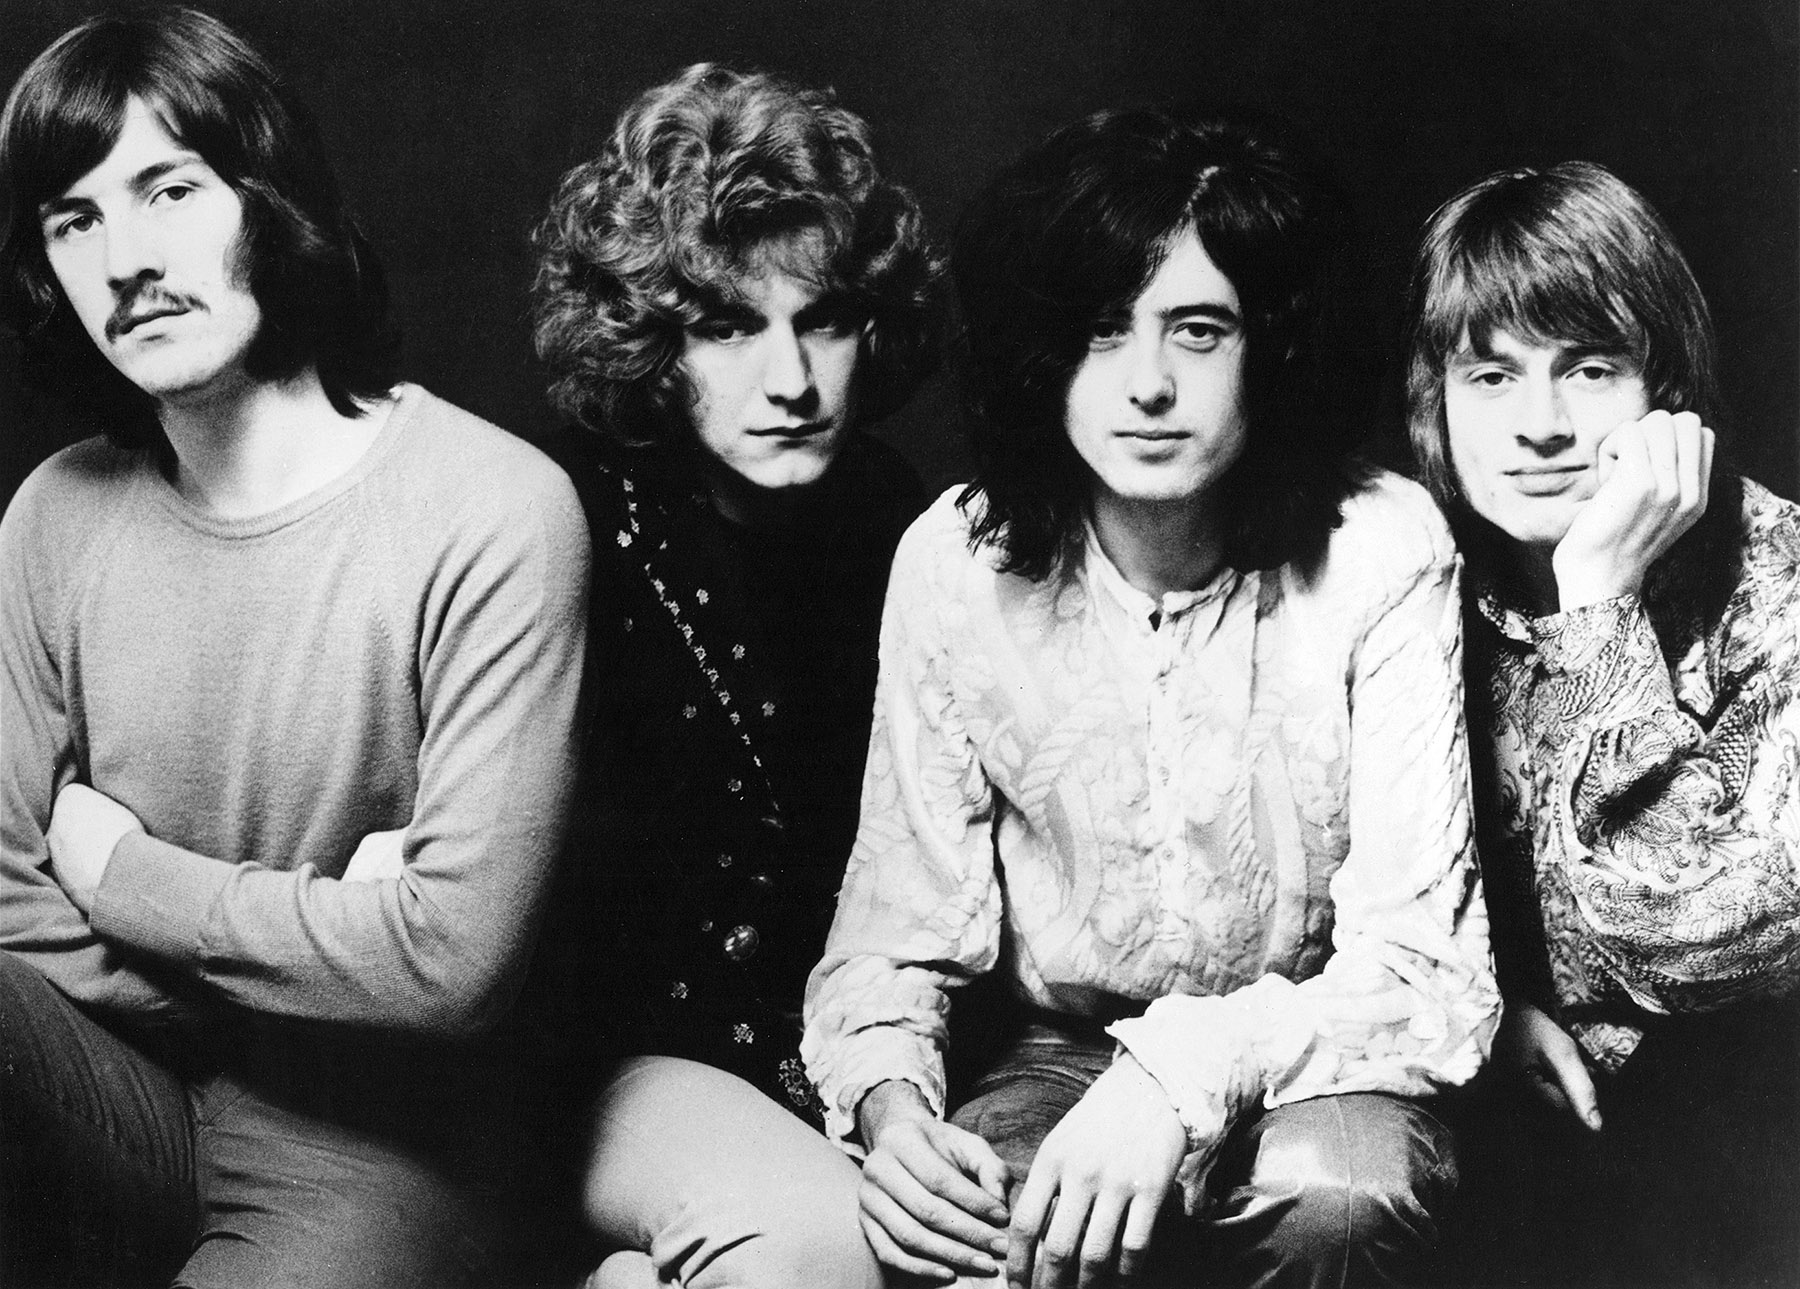 The Song Remains the Same - UK premiere ticket | Led Zeppelin